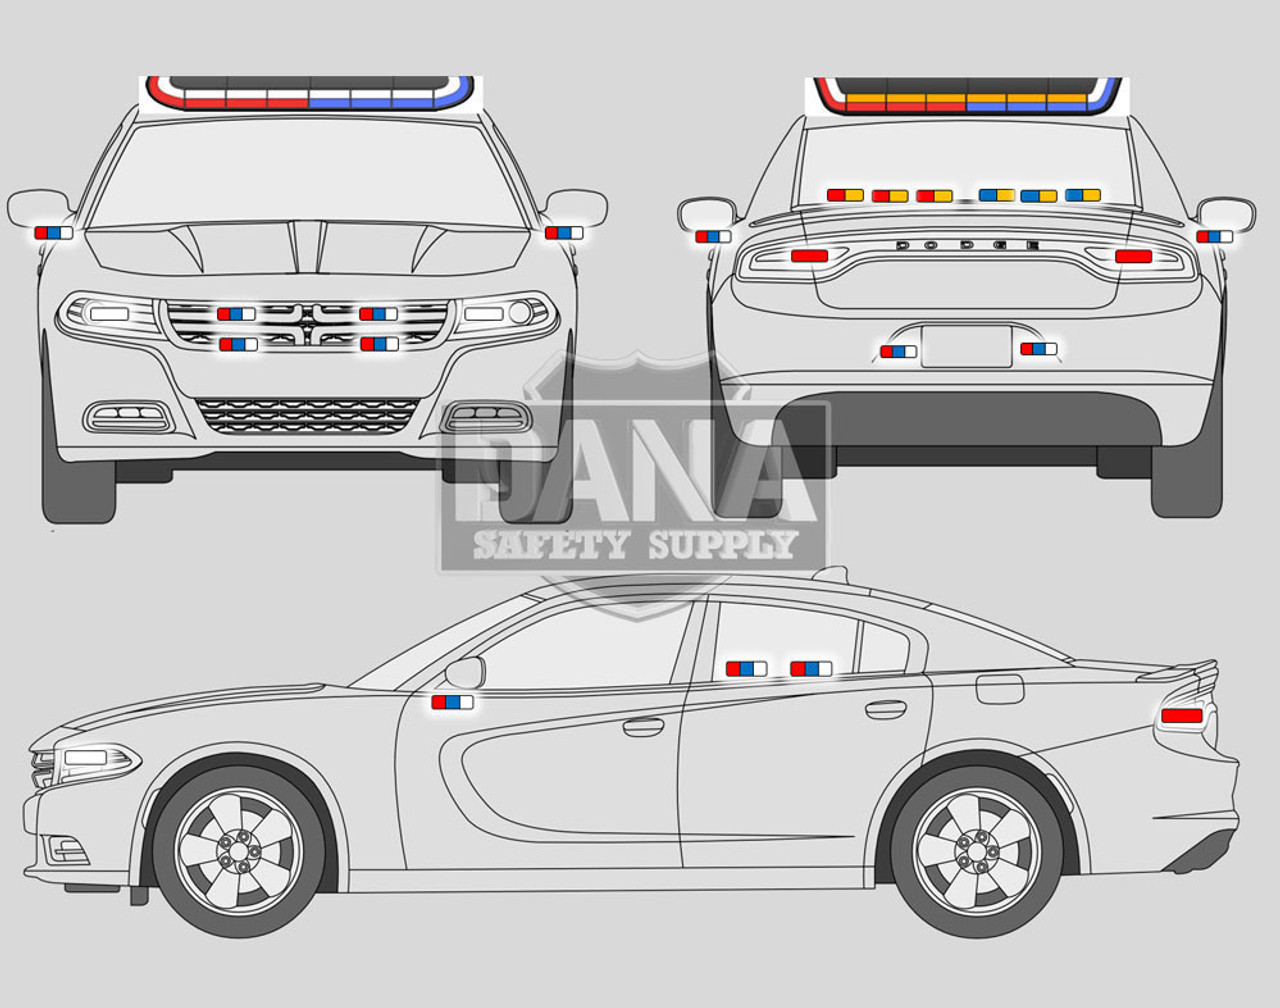 New 2023 AWD V6 White Dodge Charger PPV ready to be built as a Marked Patrol Package Police Pursuit Car (Emergency Lighting, Siren, Controller, Partition, Window Bars, etc.), + Delivery, W-MPV6-5